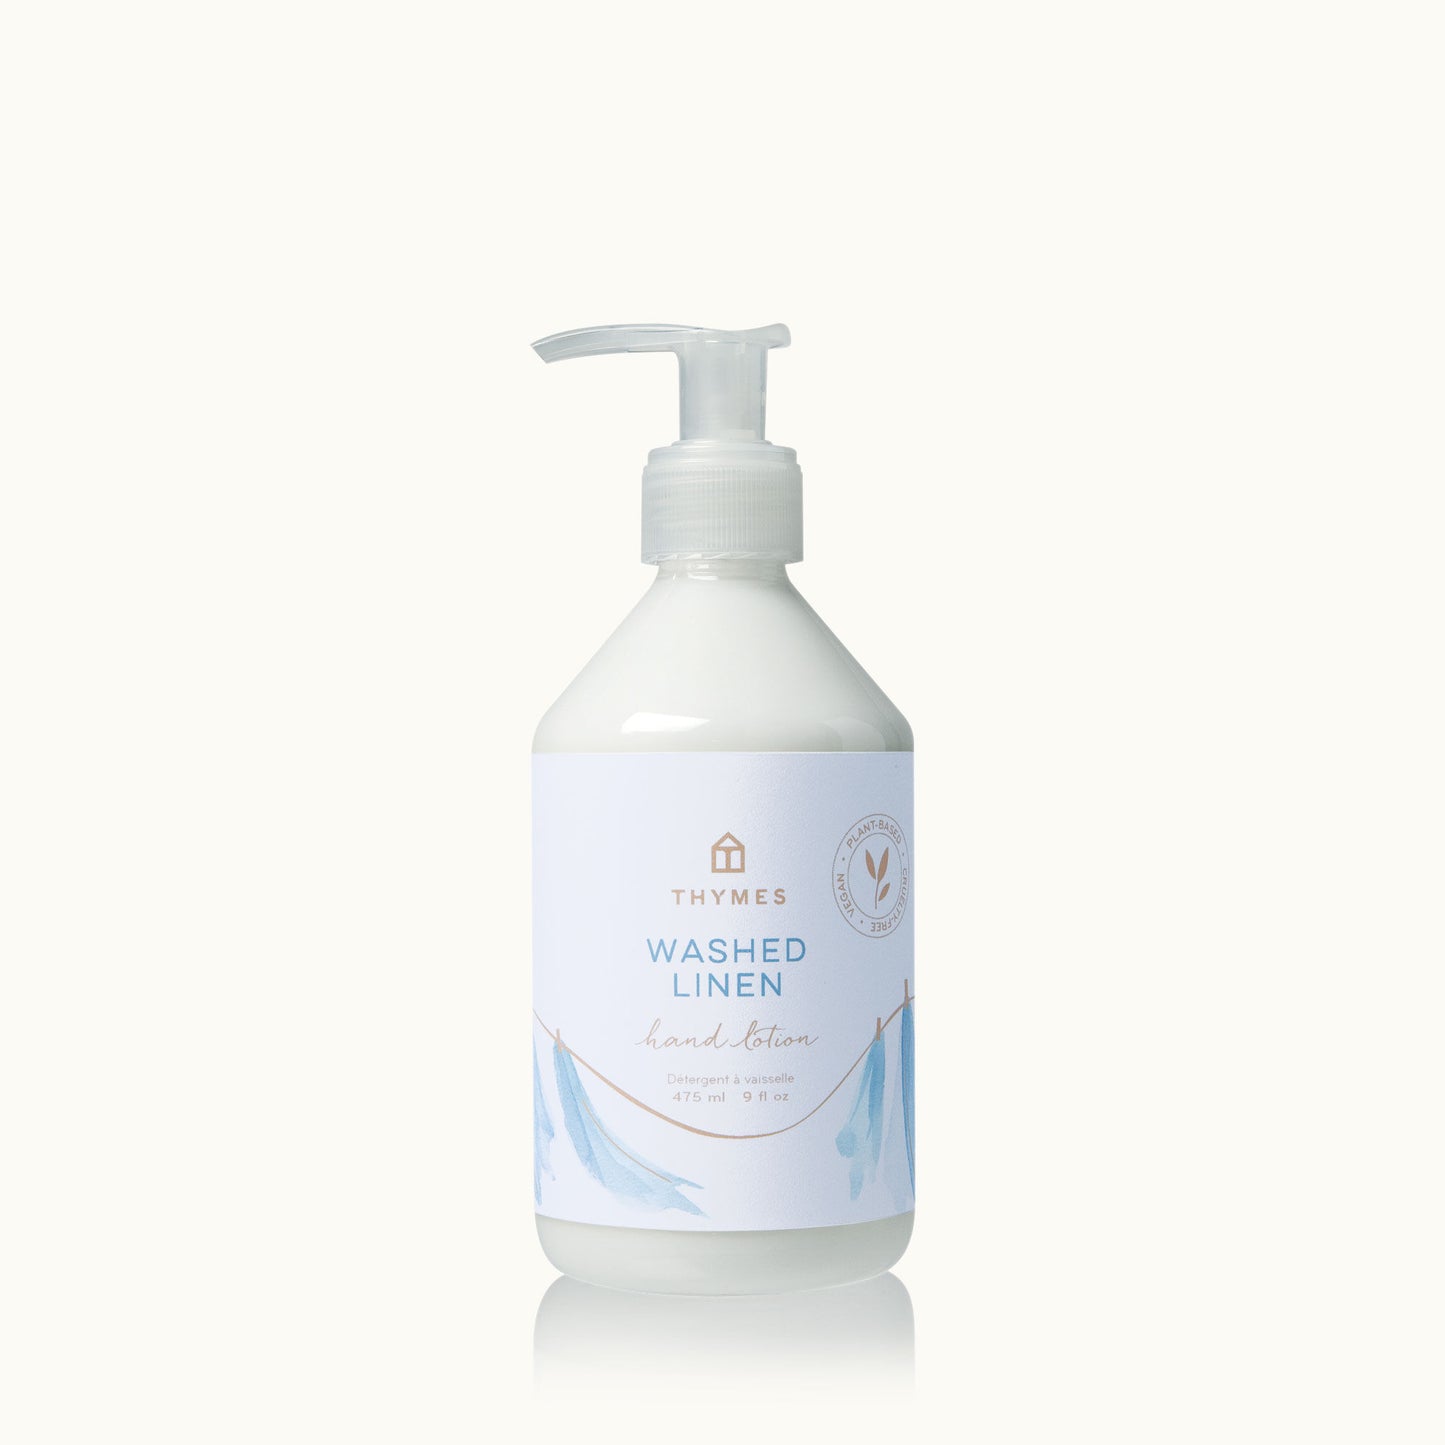 Thymes Hand Lotion, Washed Linen